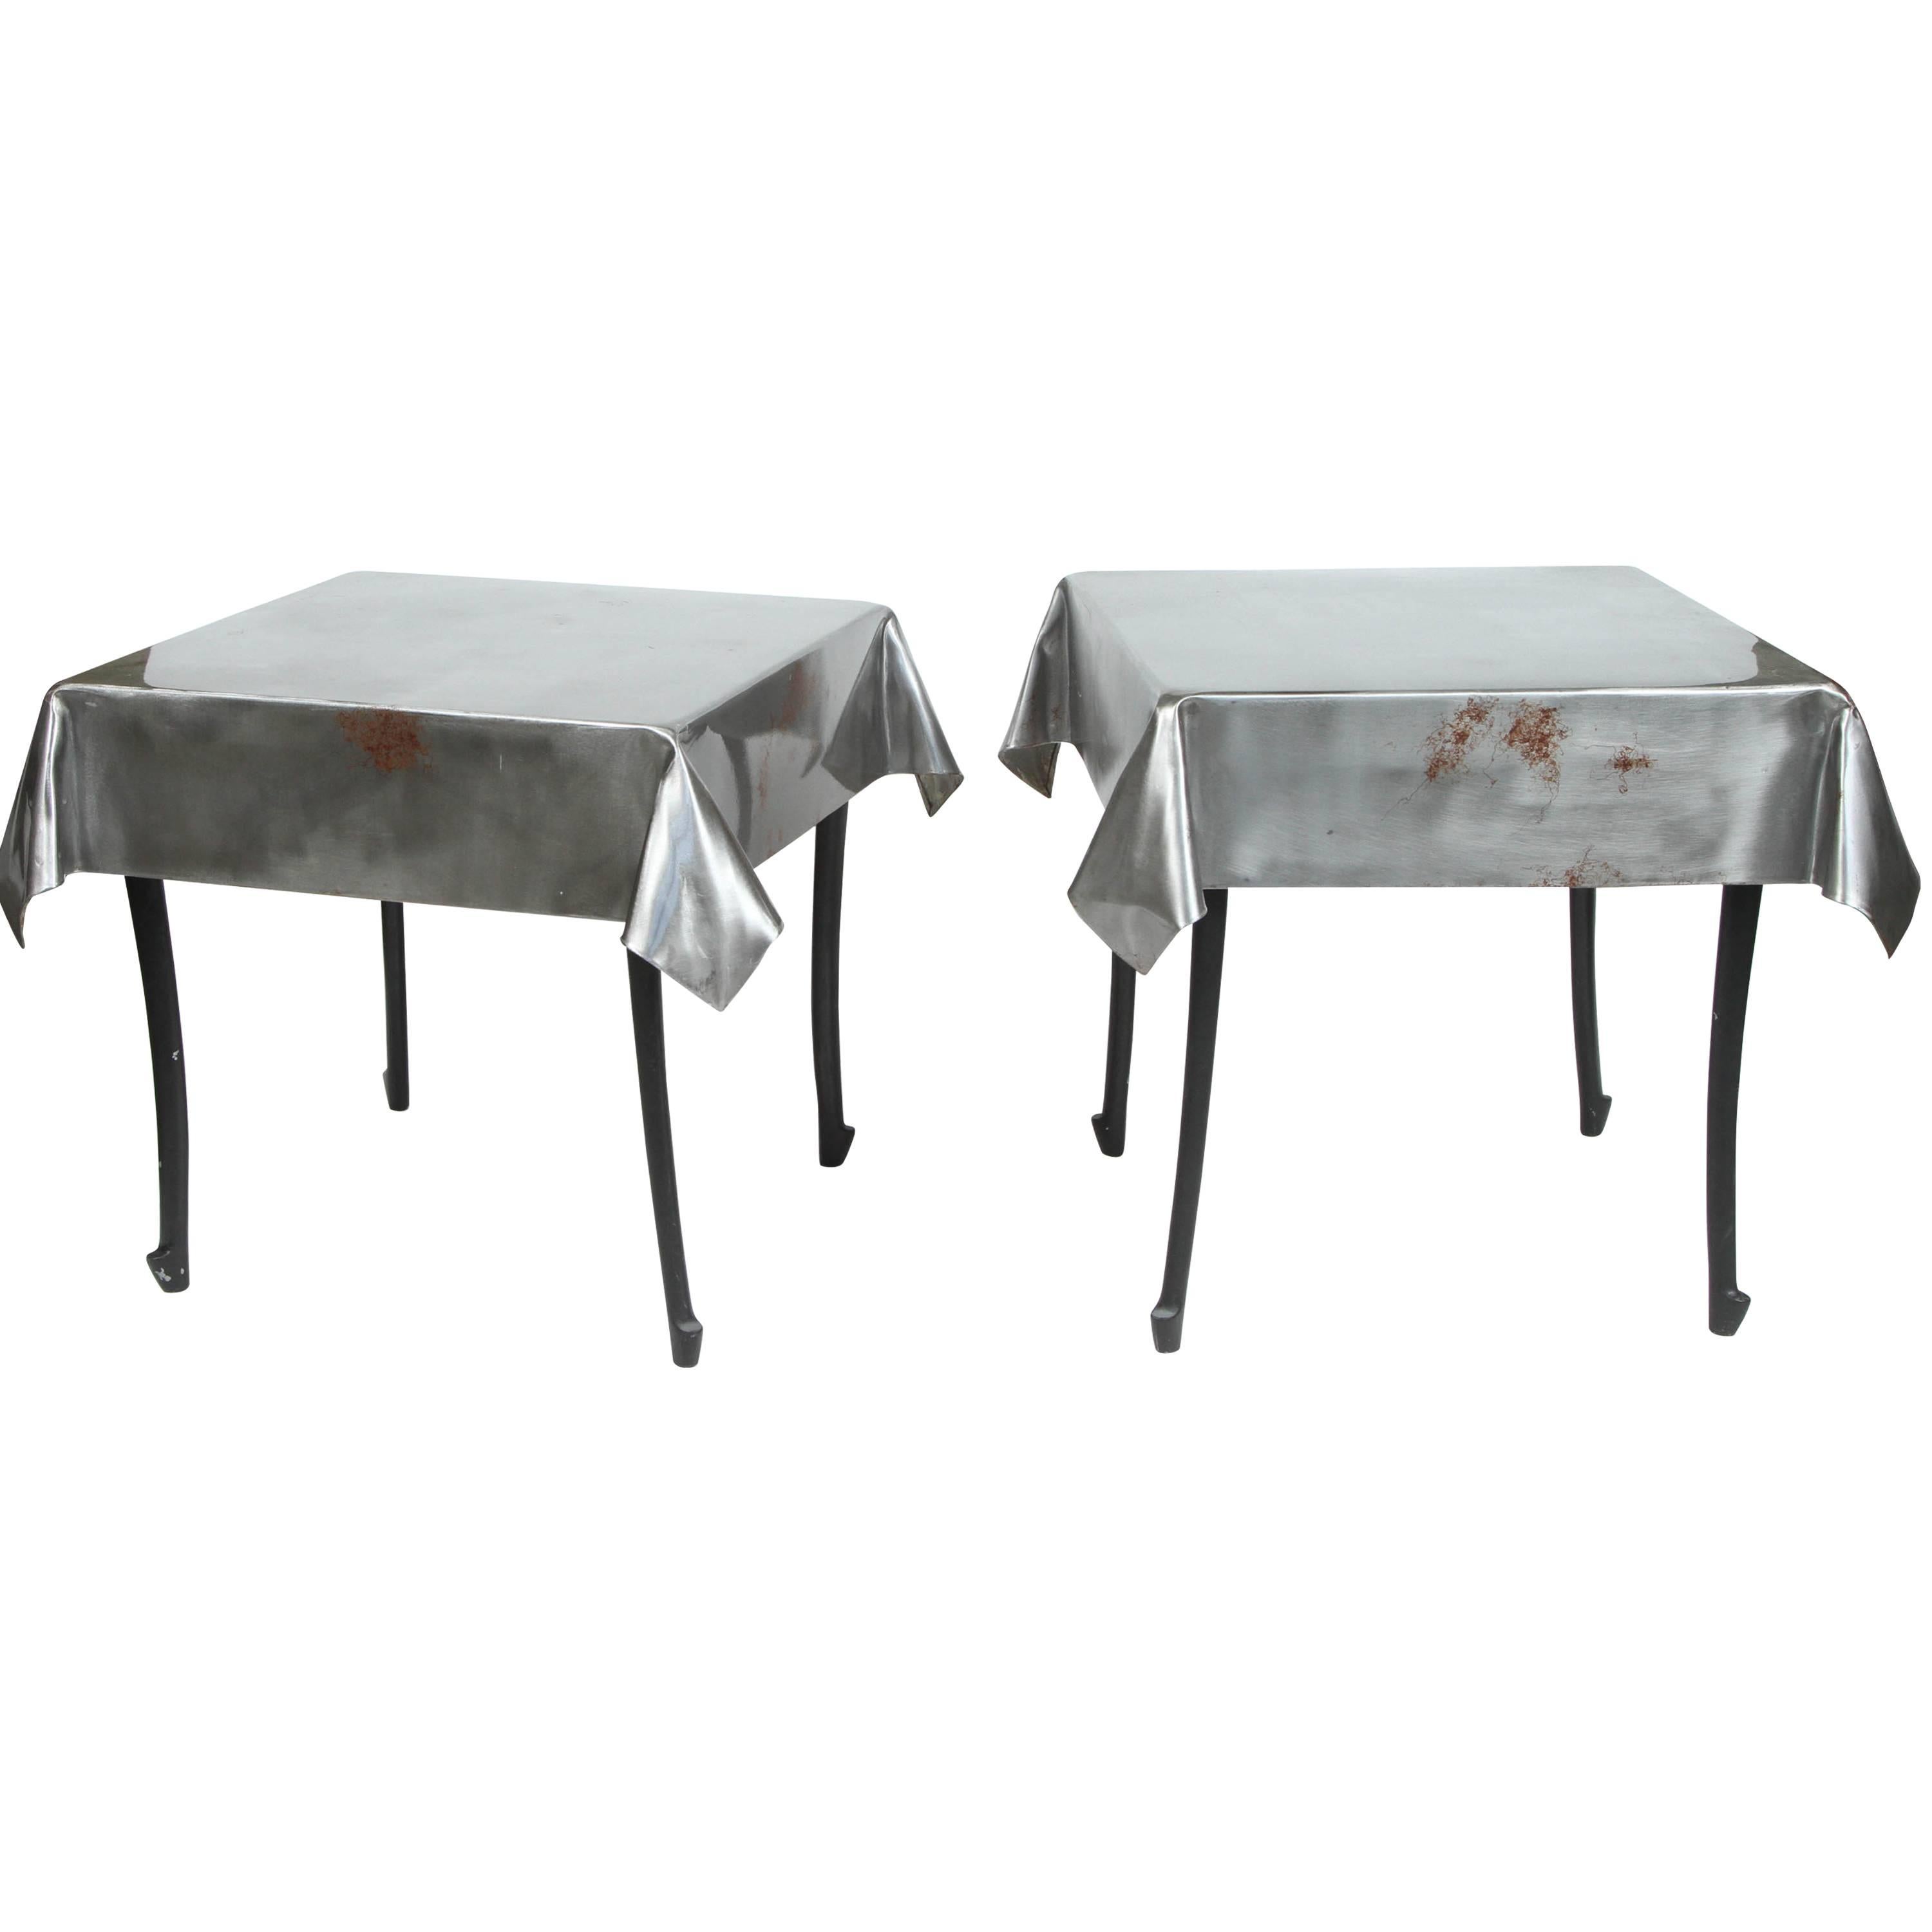 A Pair of Vintage Steel End Tables with “Skirts” and Cabriole Legs